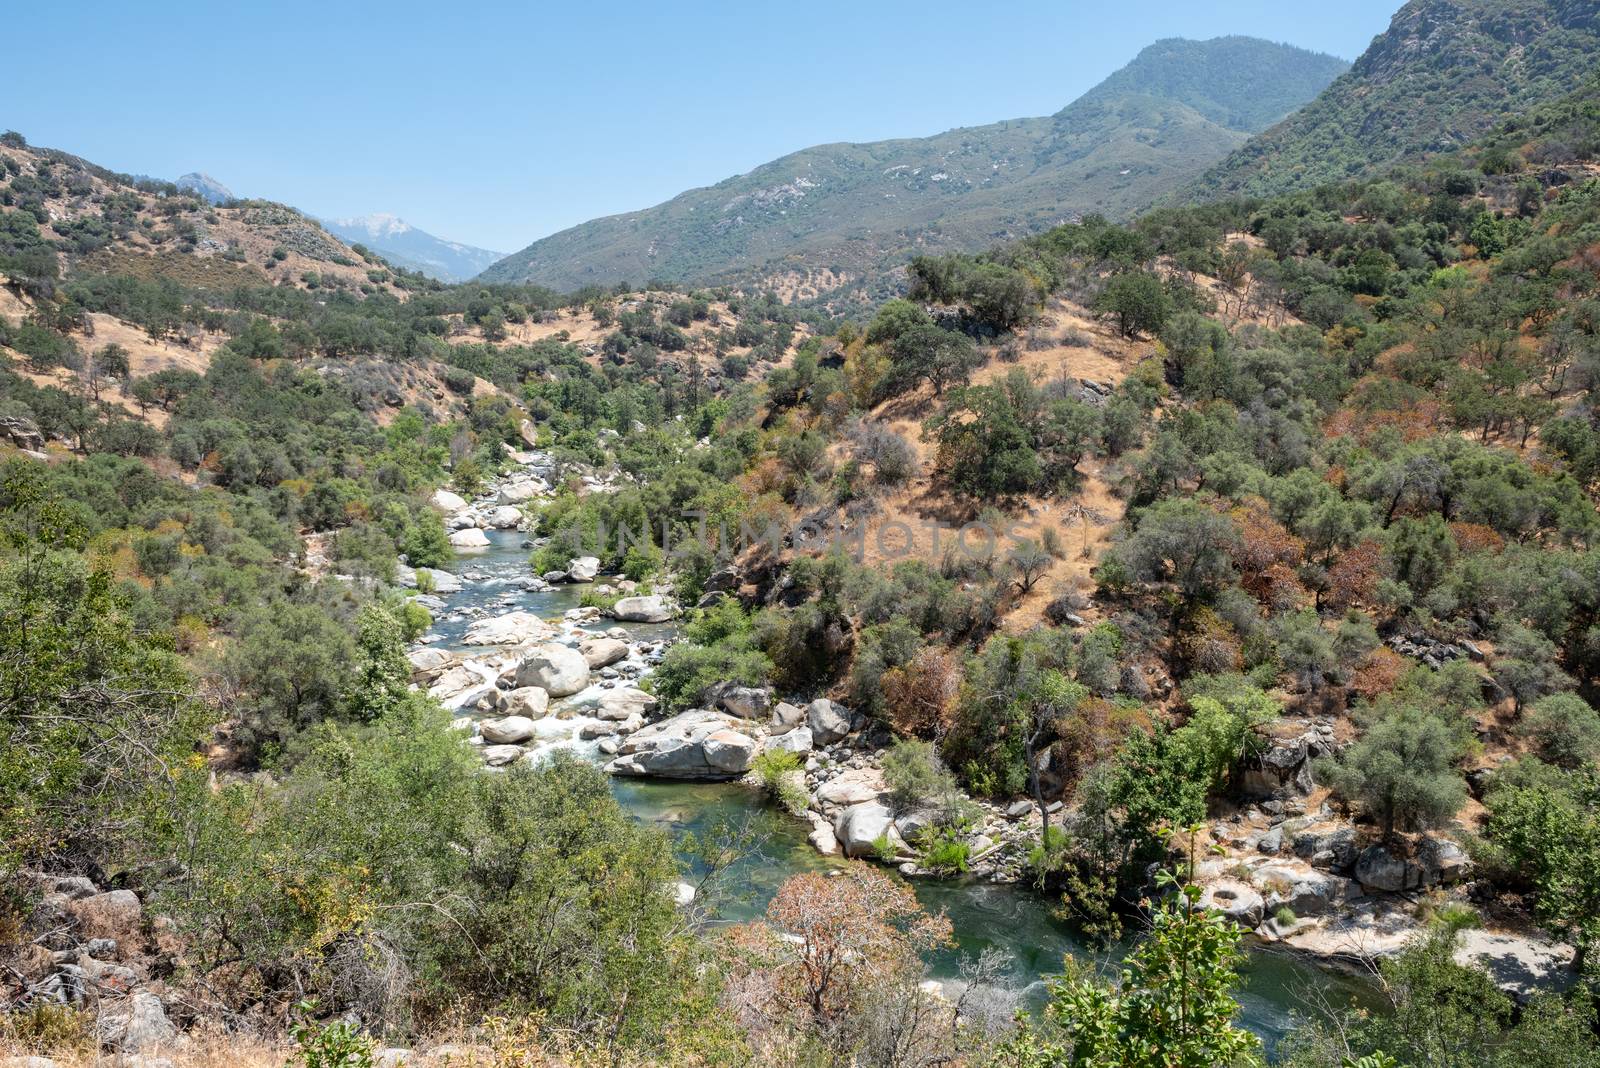 View of the Kaweah River near the entrance to Sequoia National Park, California by Njean